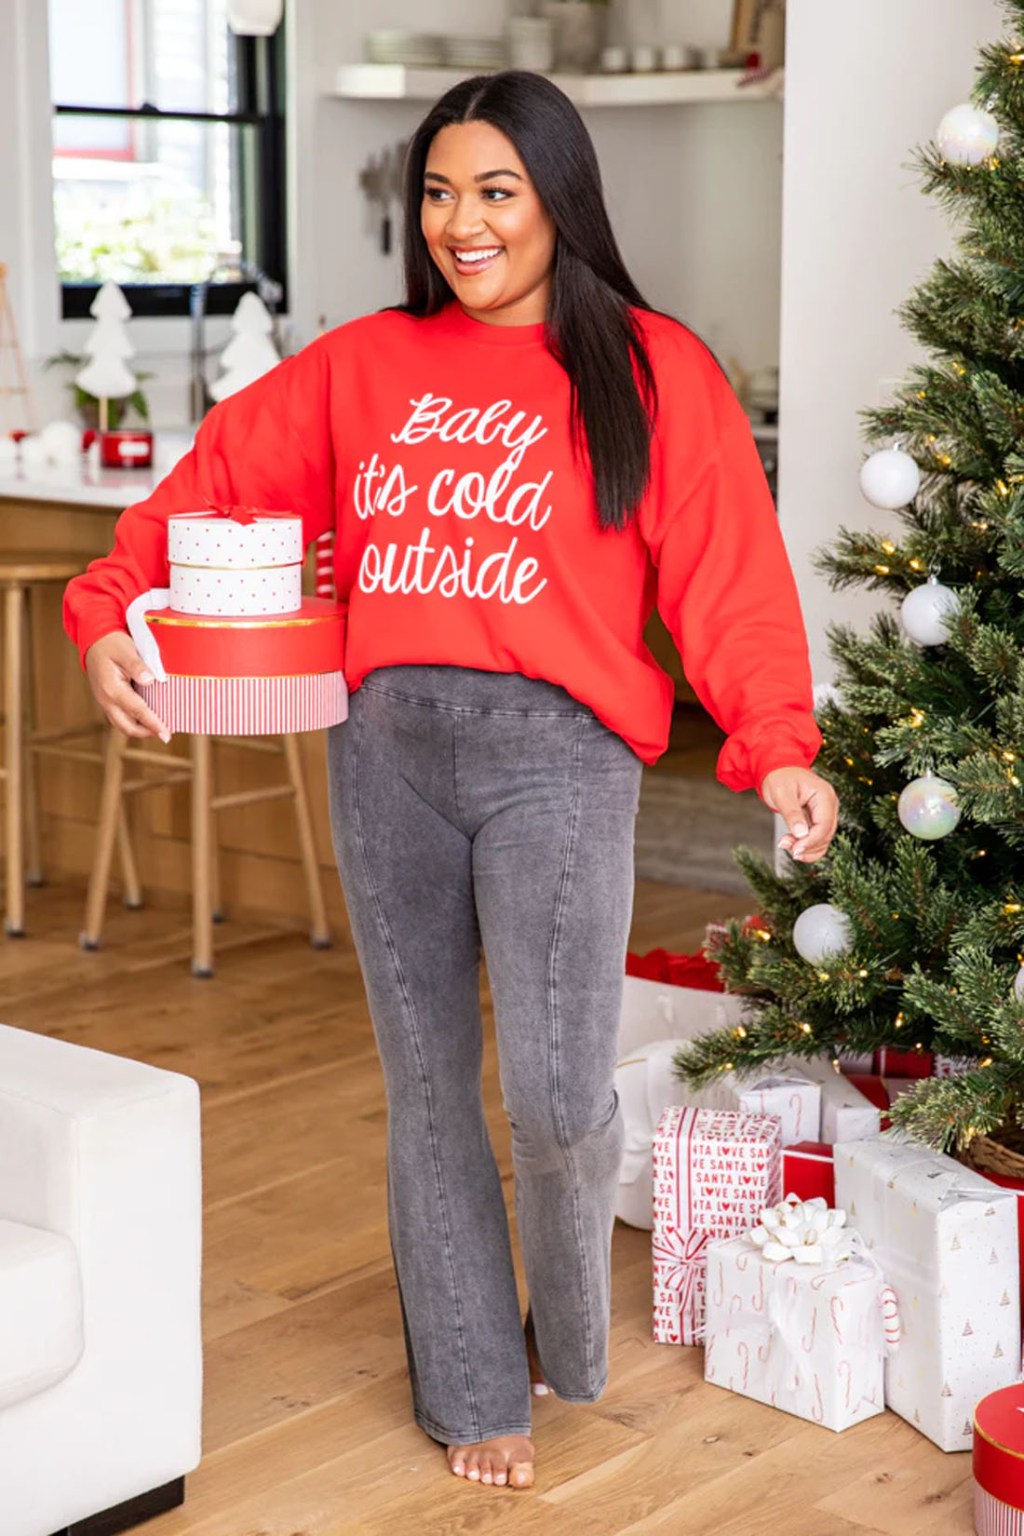 baby its cold outside sweatshirt best casual Christmas outfits for holiday party